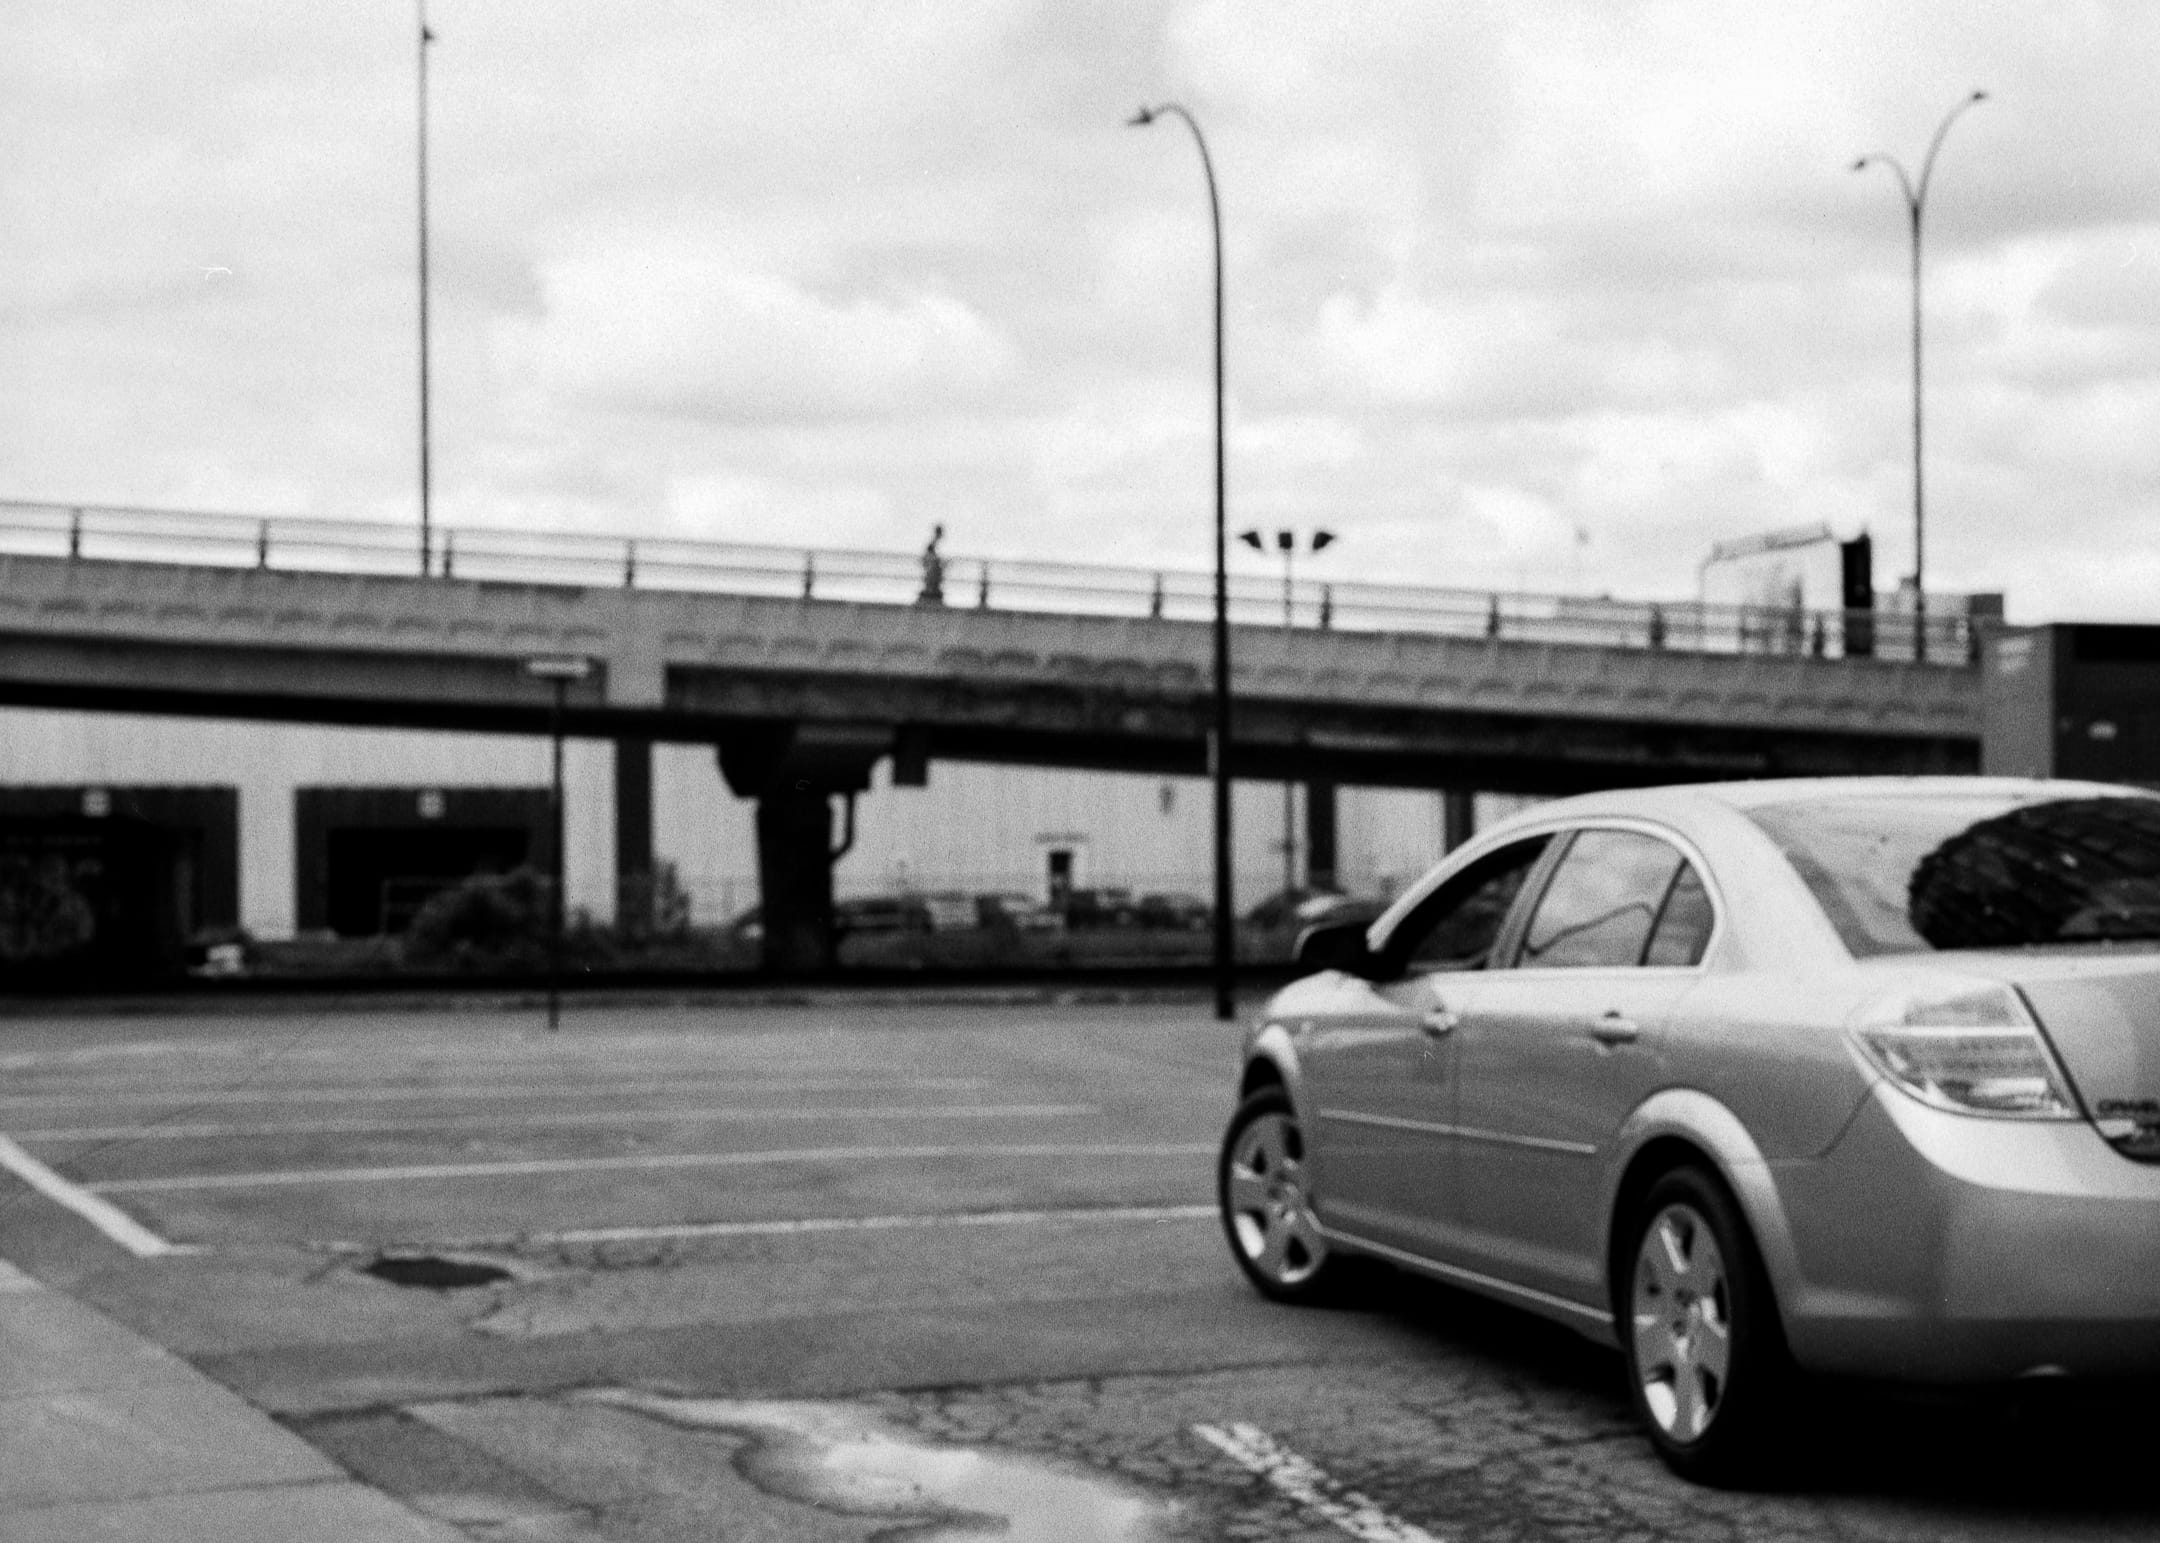 A car parked to the right of the frame with an overpass in the background